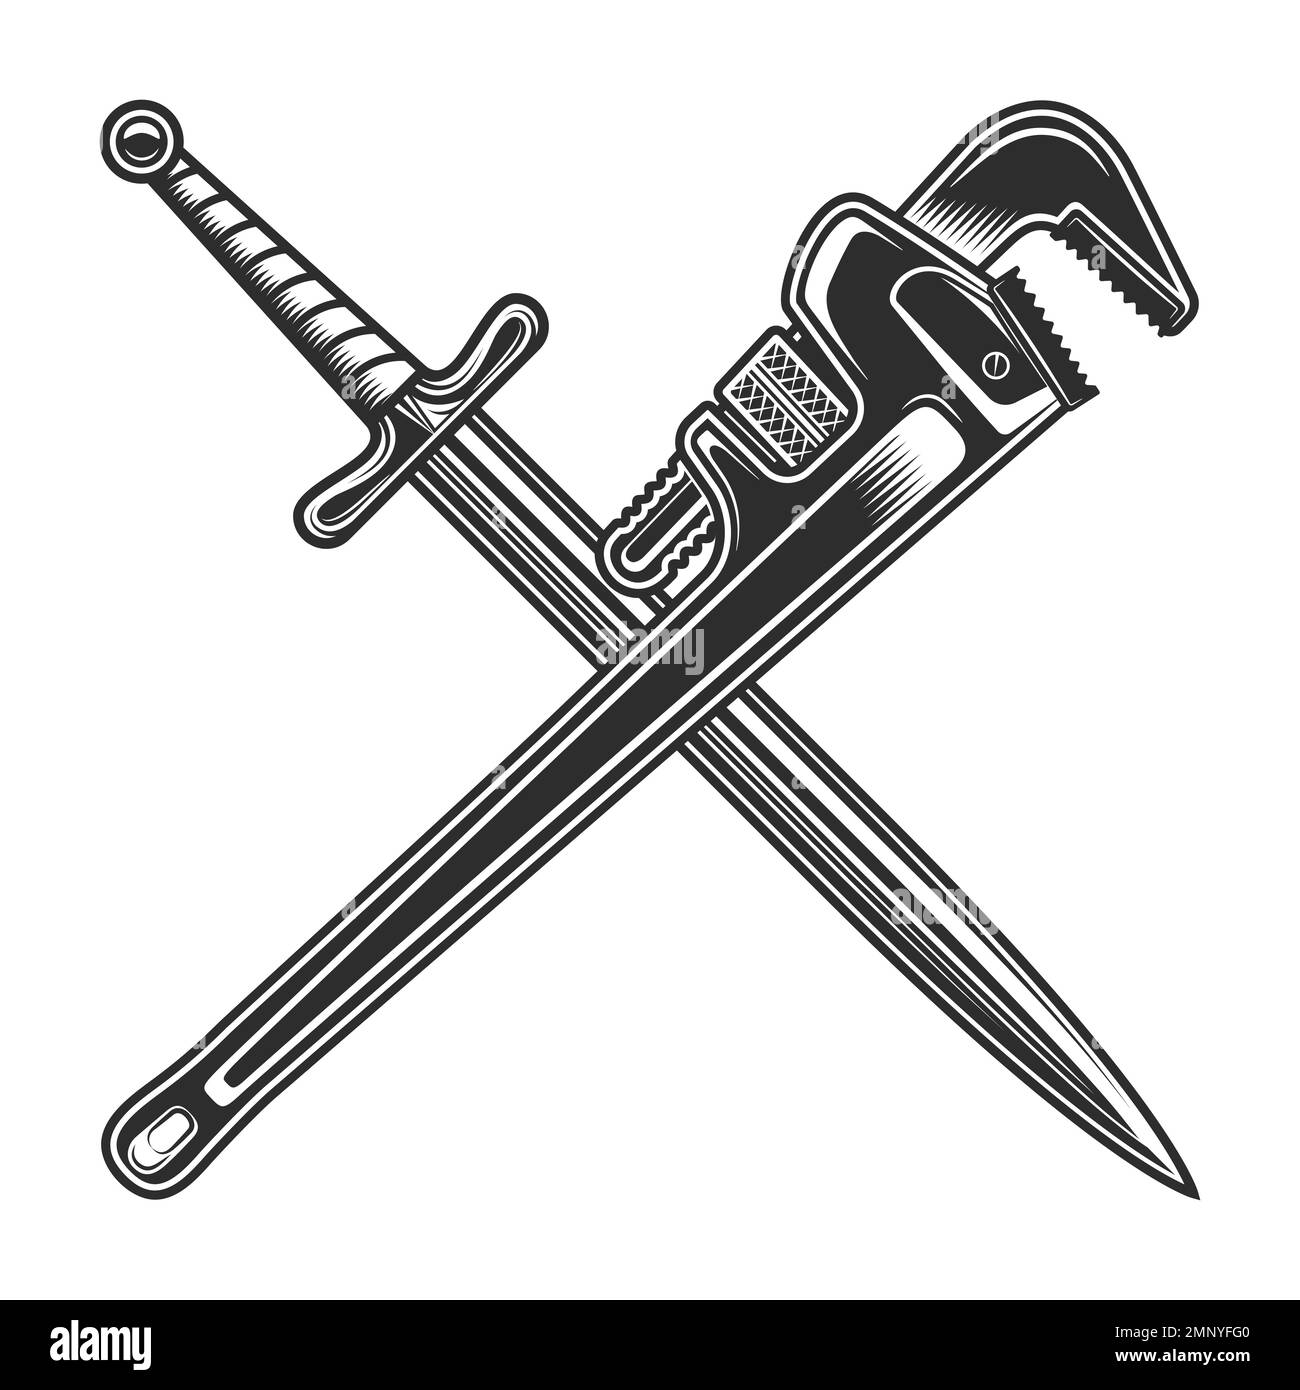 Vintage sword and body shop mechanic spanner repair tool or construction wrench for gas and builder plumbing pipe in monochrome style illustration Stock Vector